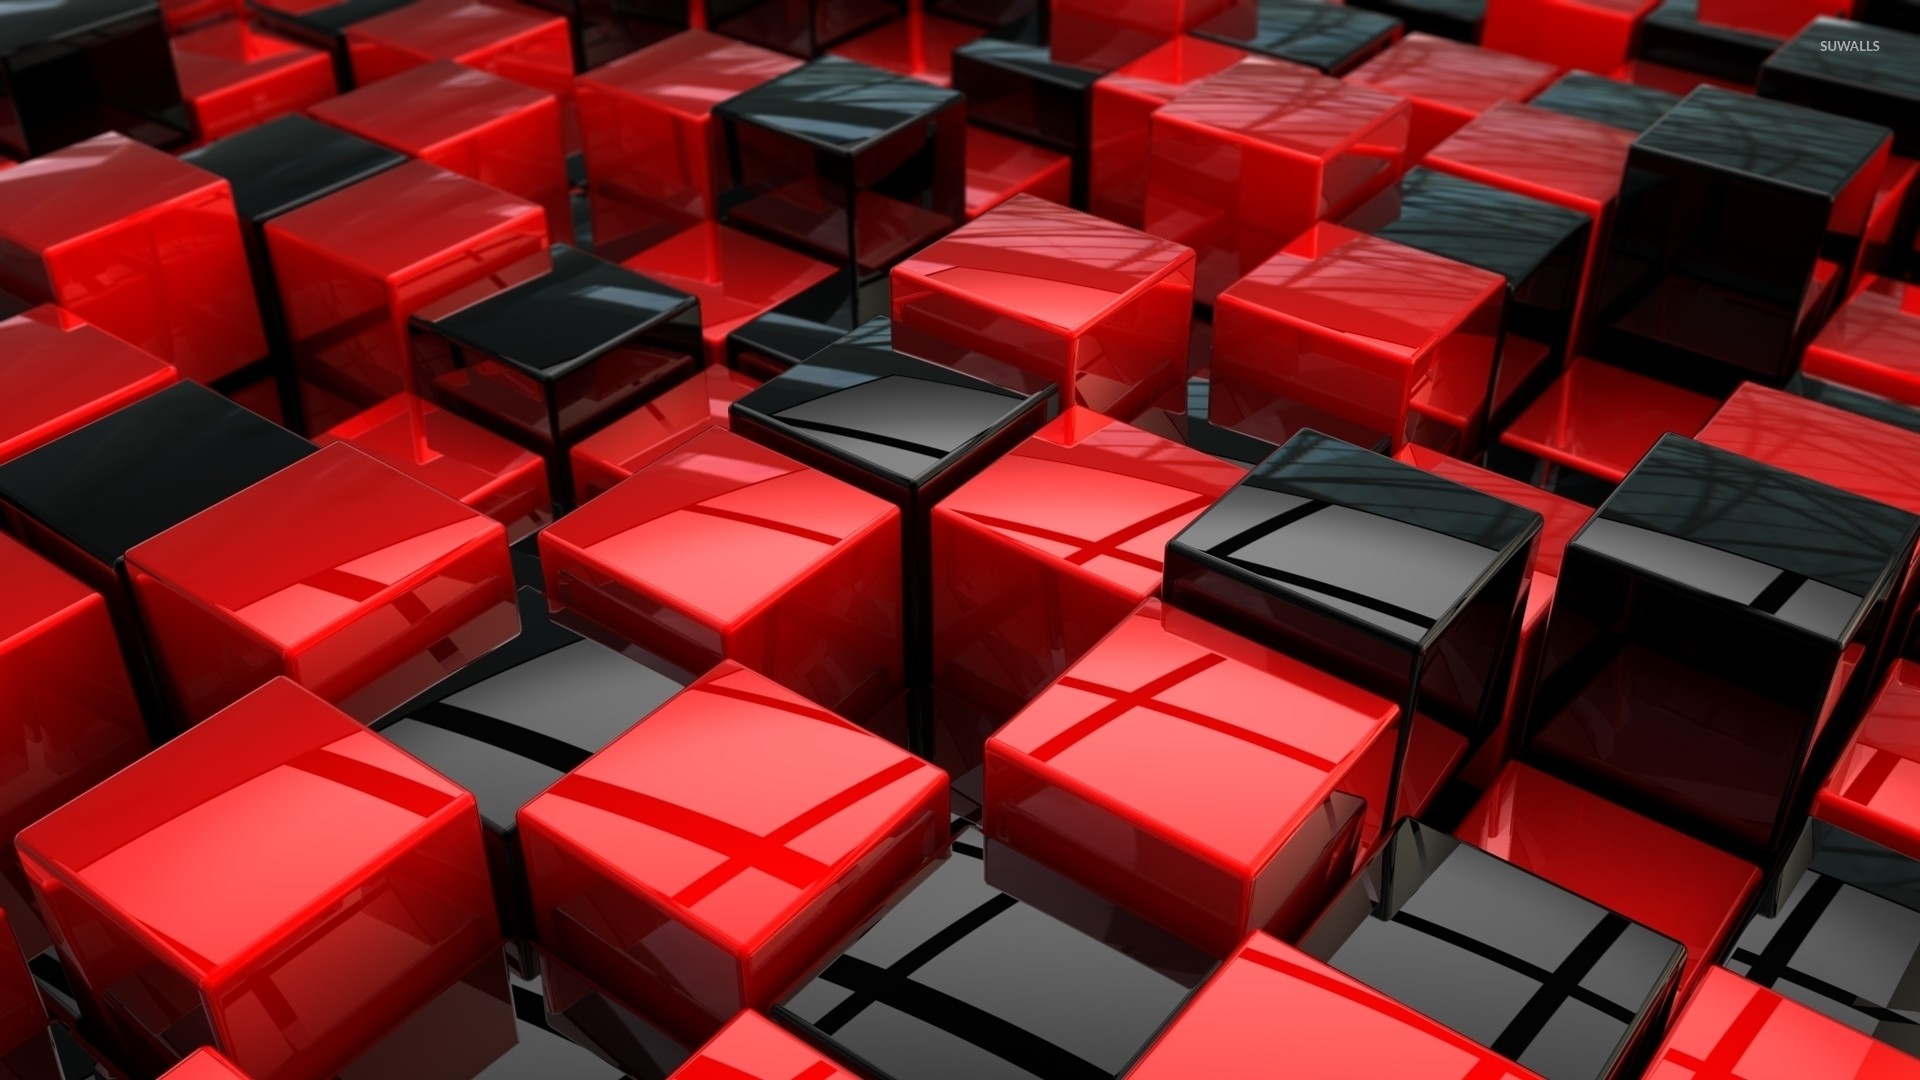 1920x1080 Red and black cubes wallpaper